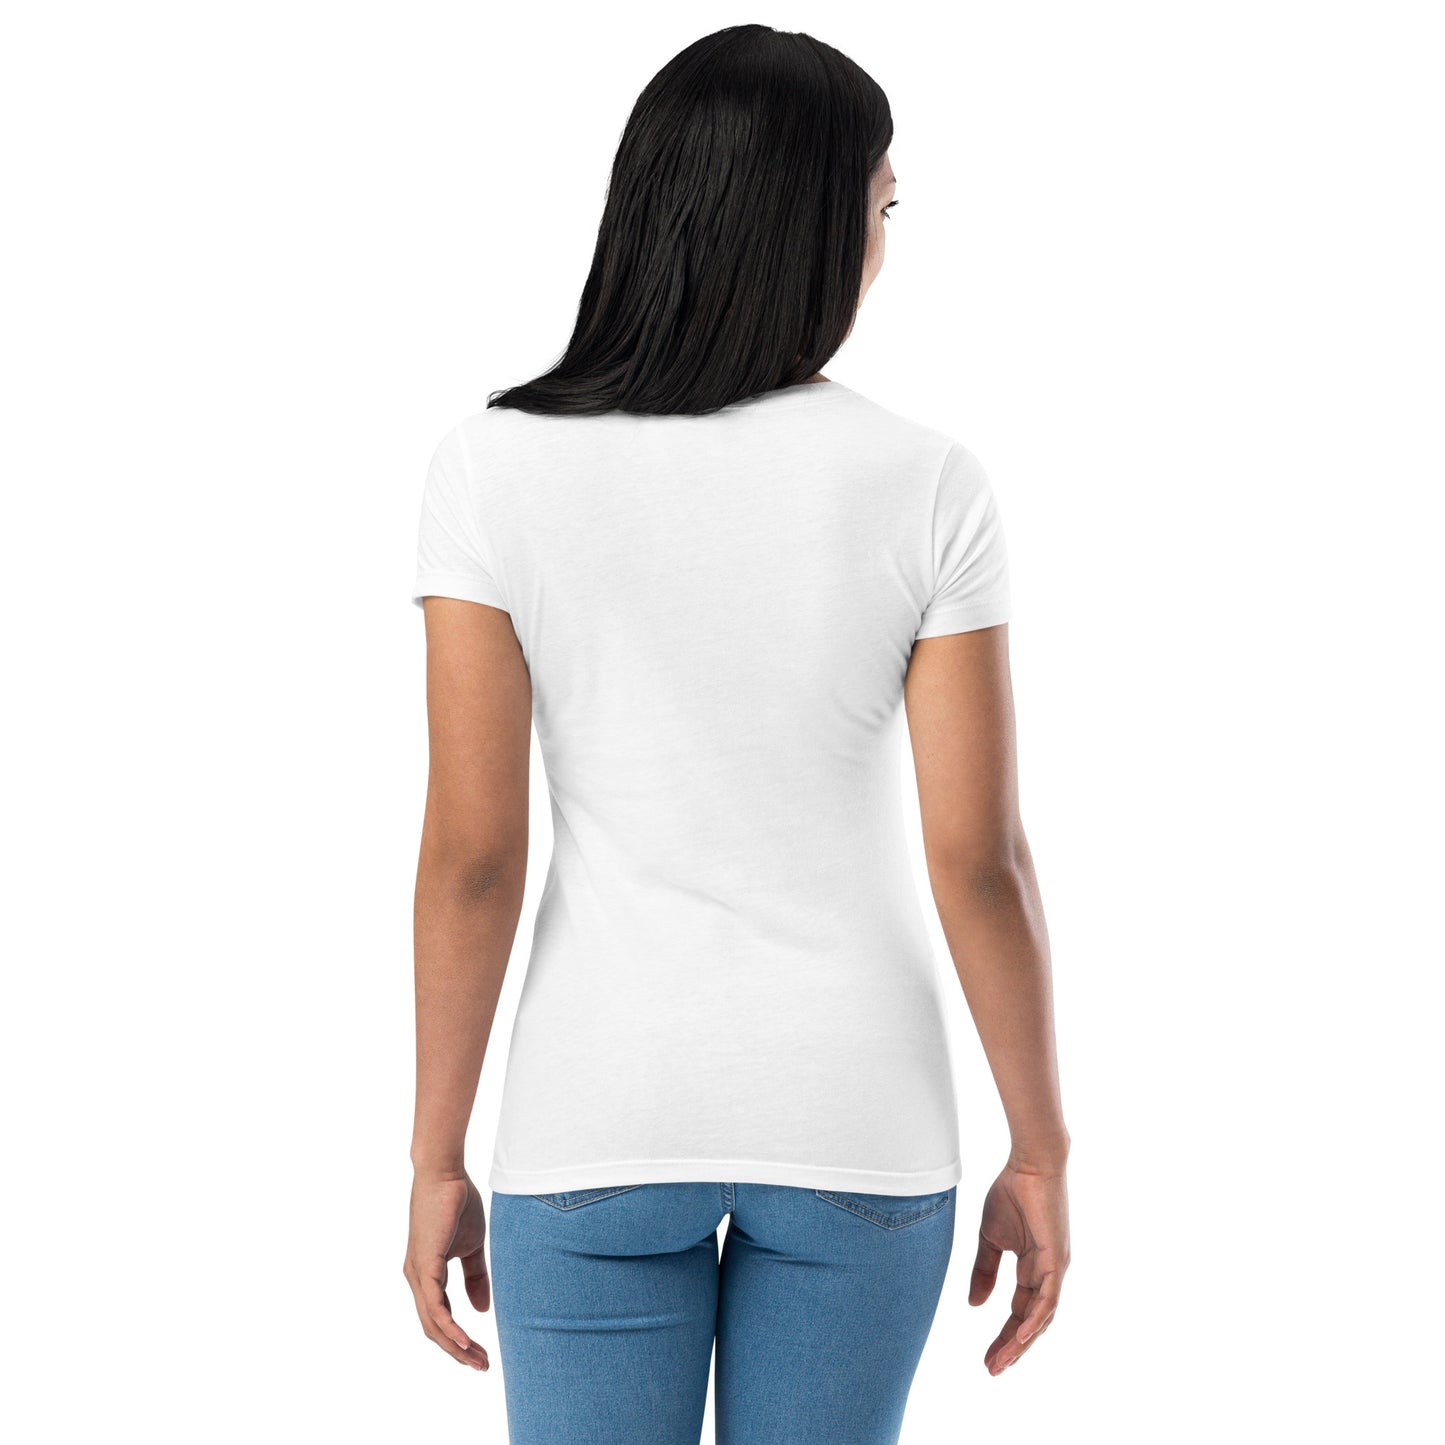 Wild Bloom Women’s Fitted T-Shirt